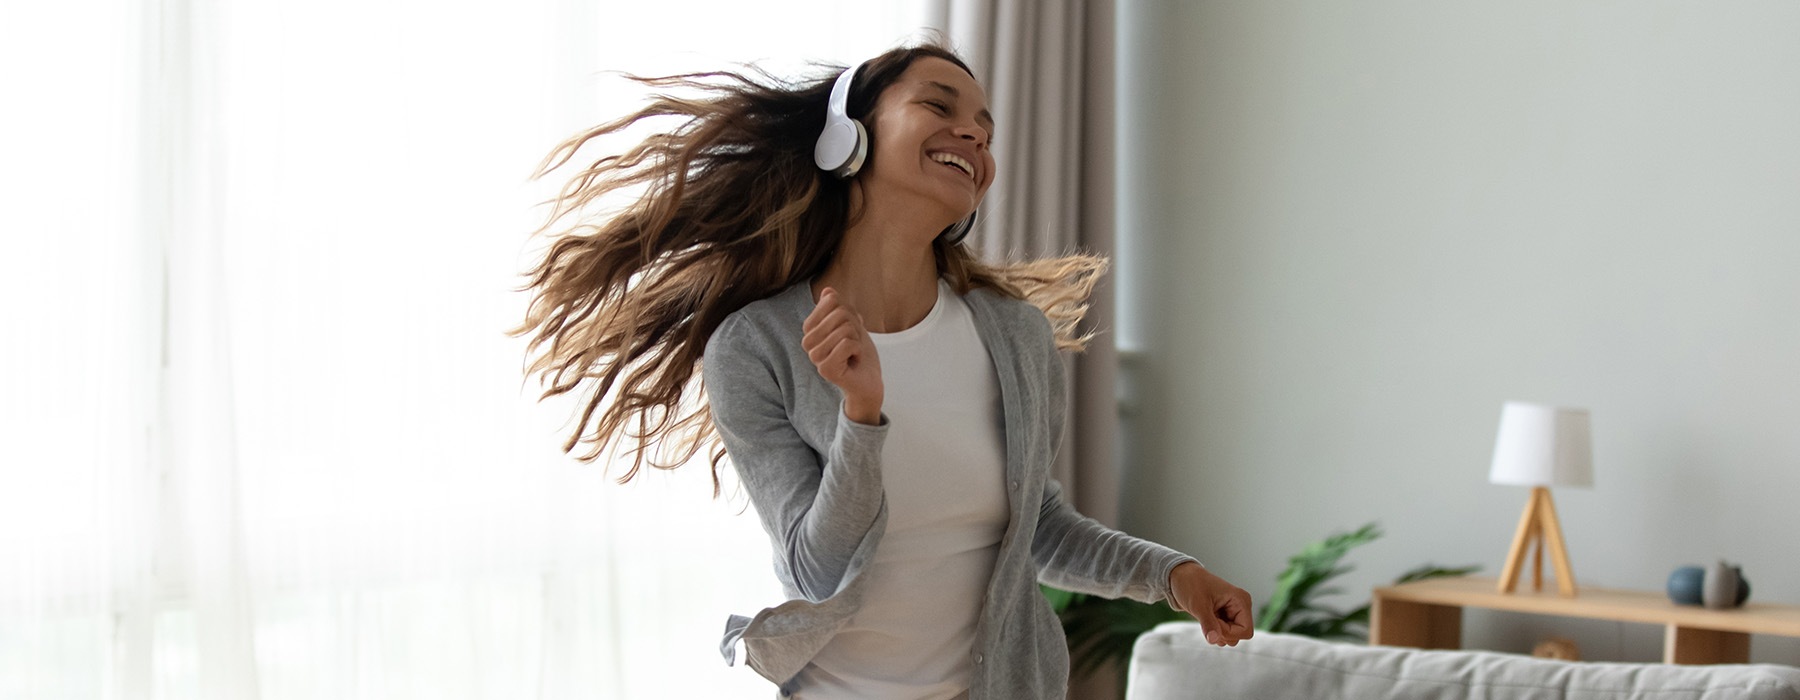 Girl listening to music and dancing